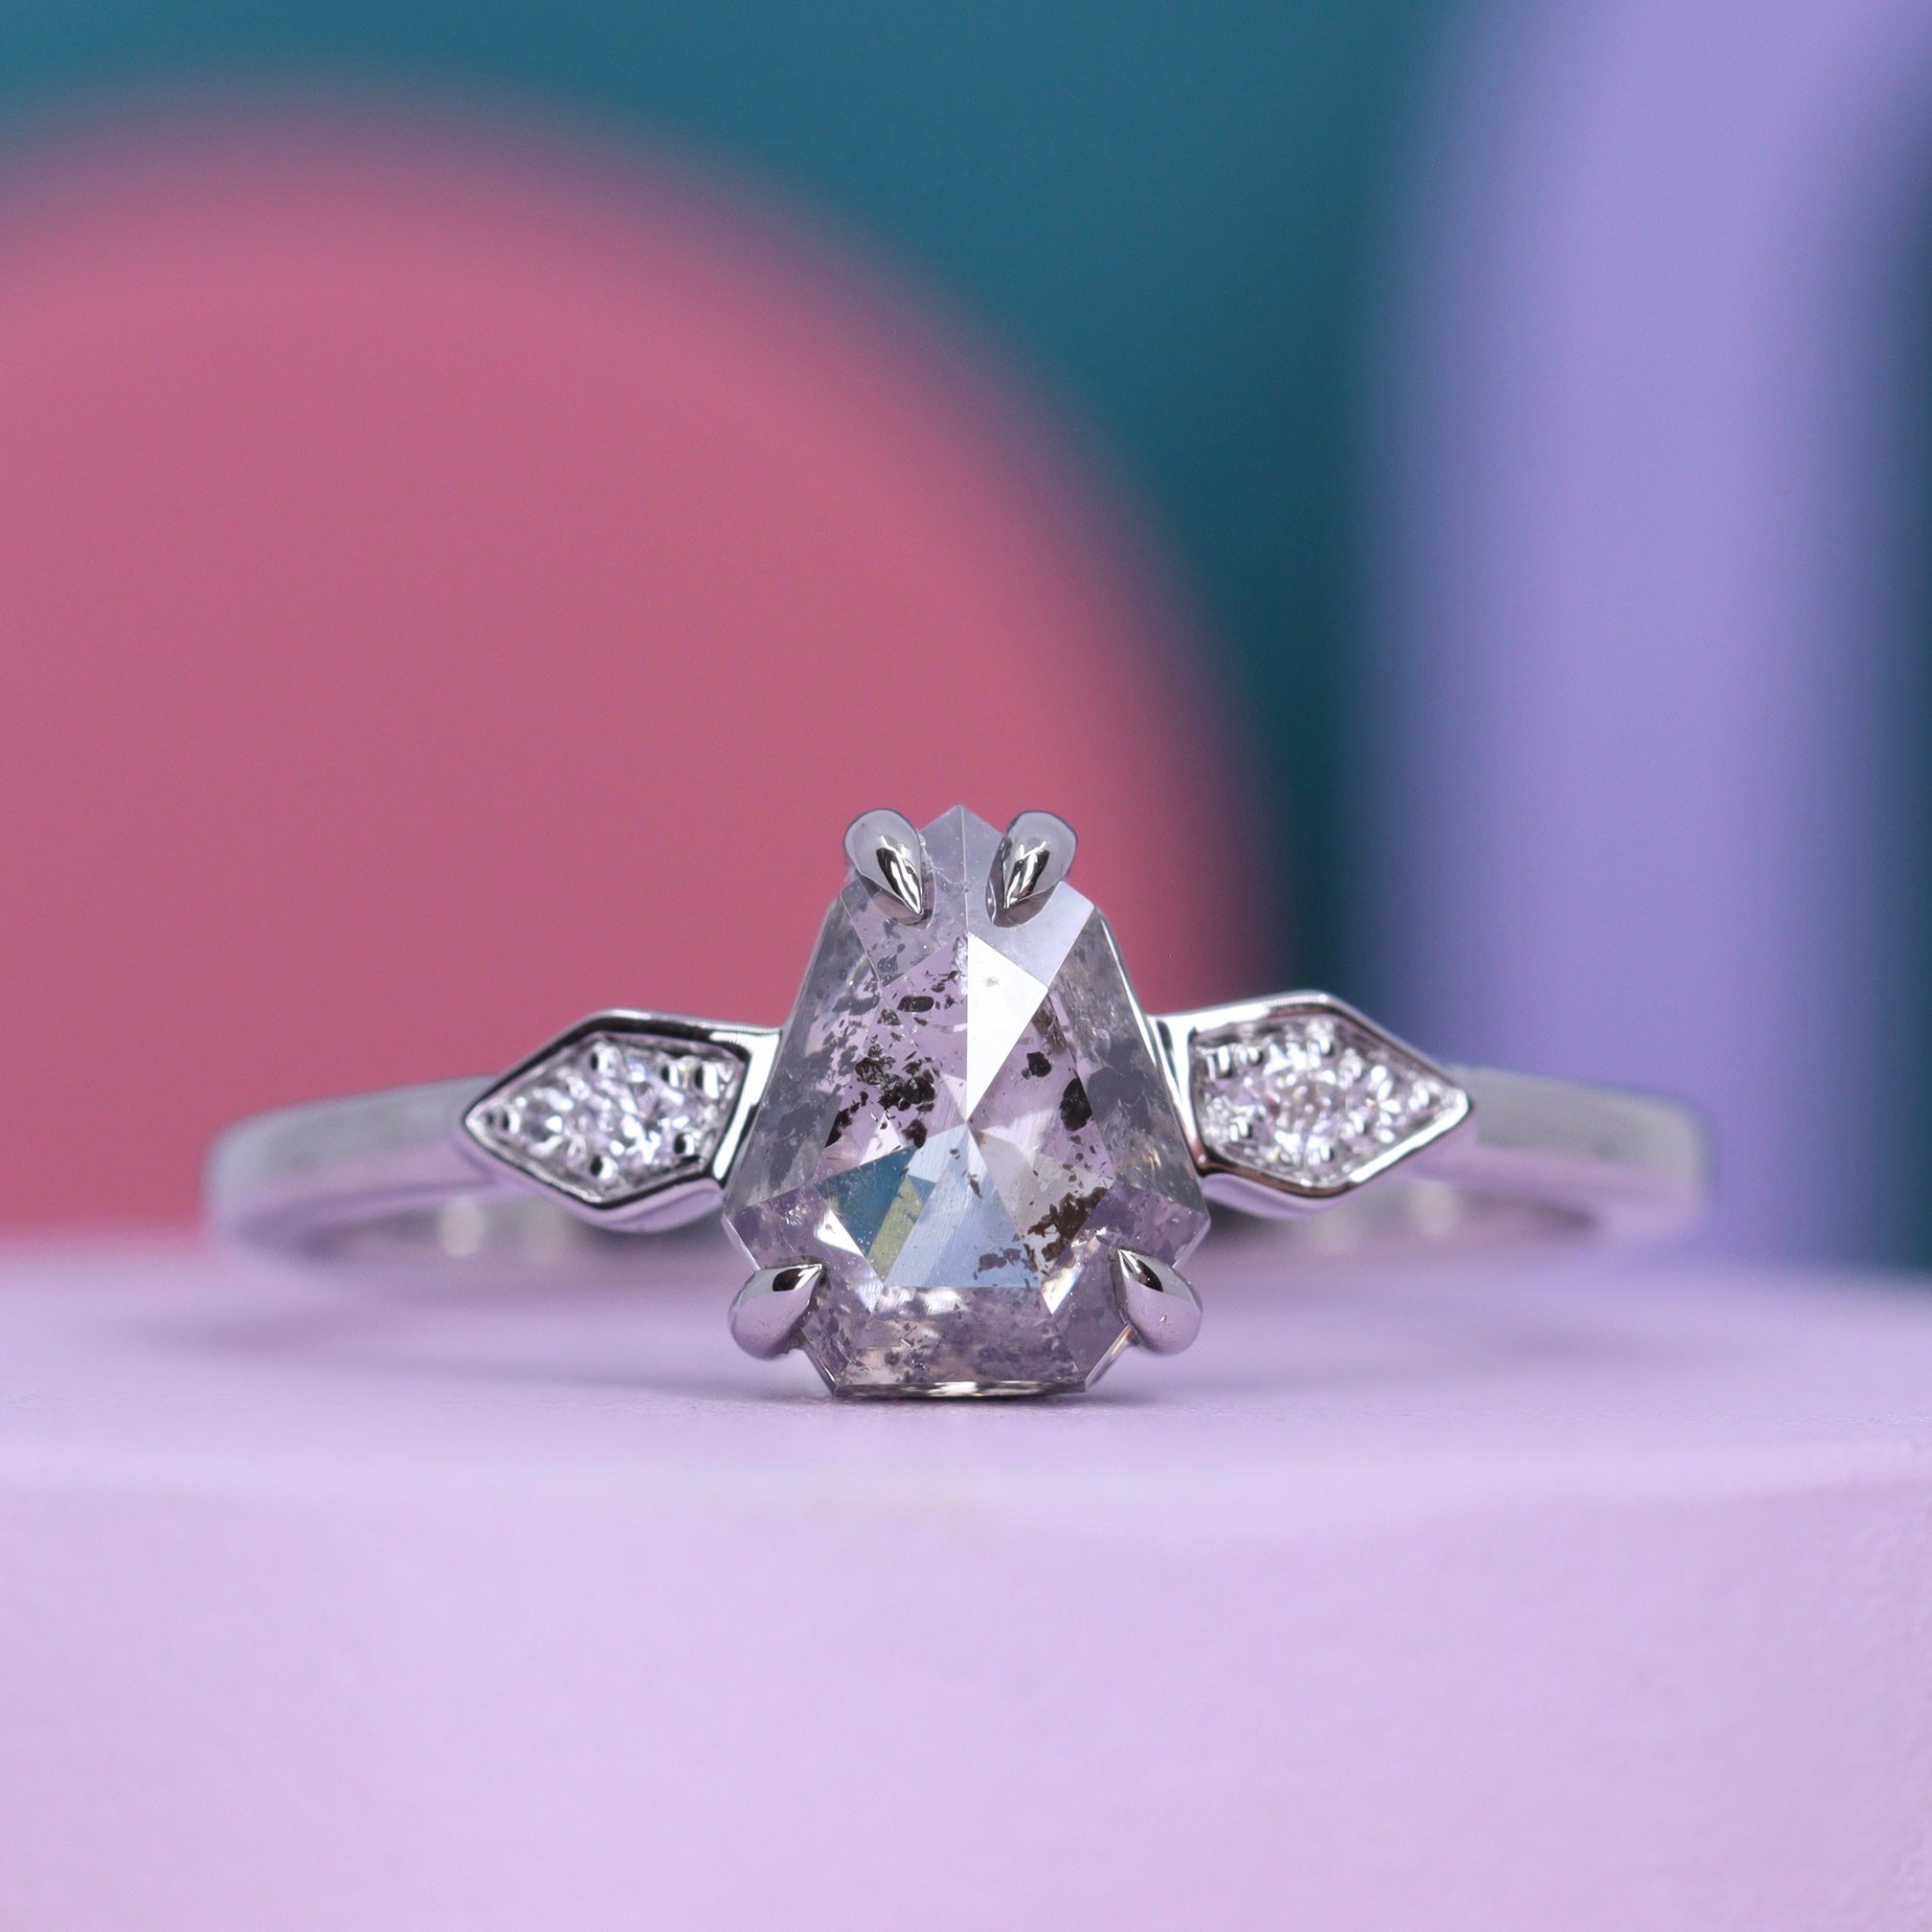 100 The most beautiful engagement rings you'll want to own